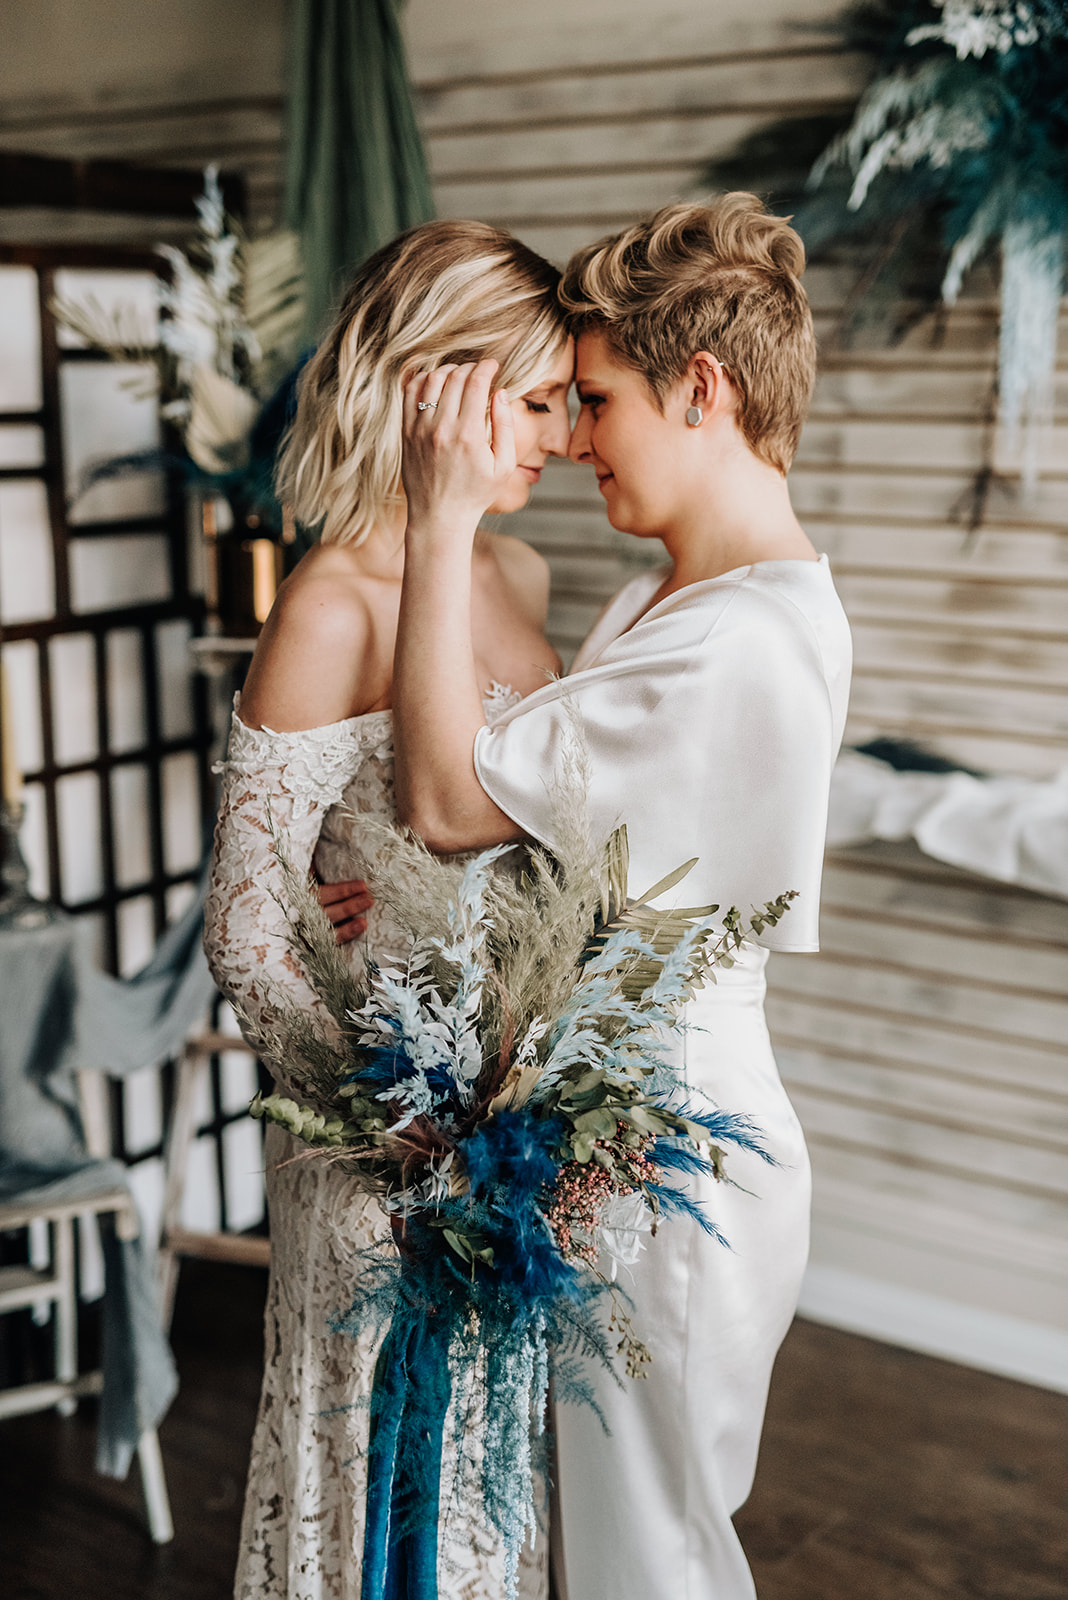 Brides share an intimate moment for this chic and bohemian elopement inspiration shoot